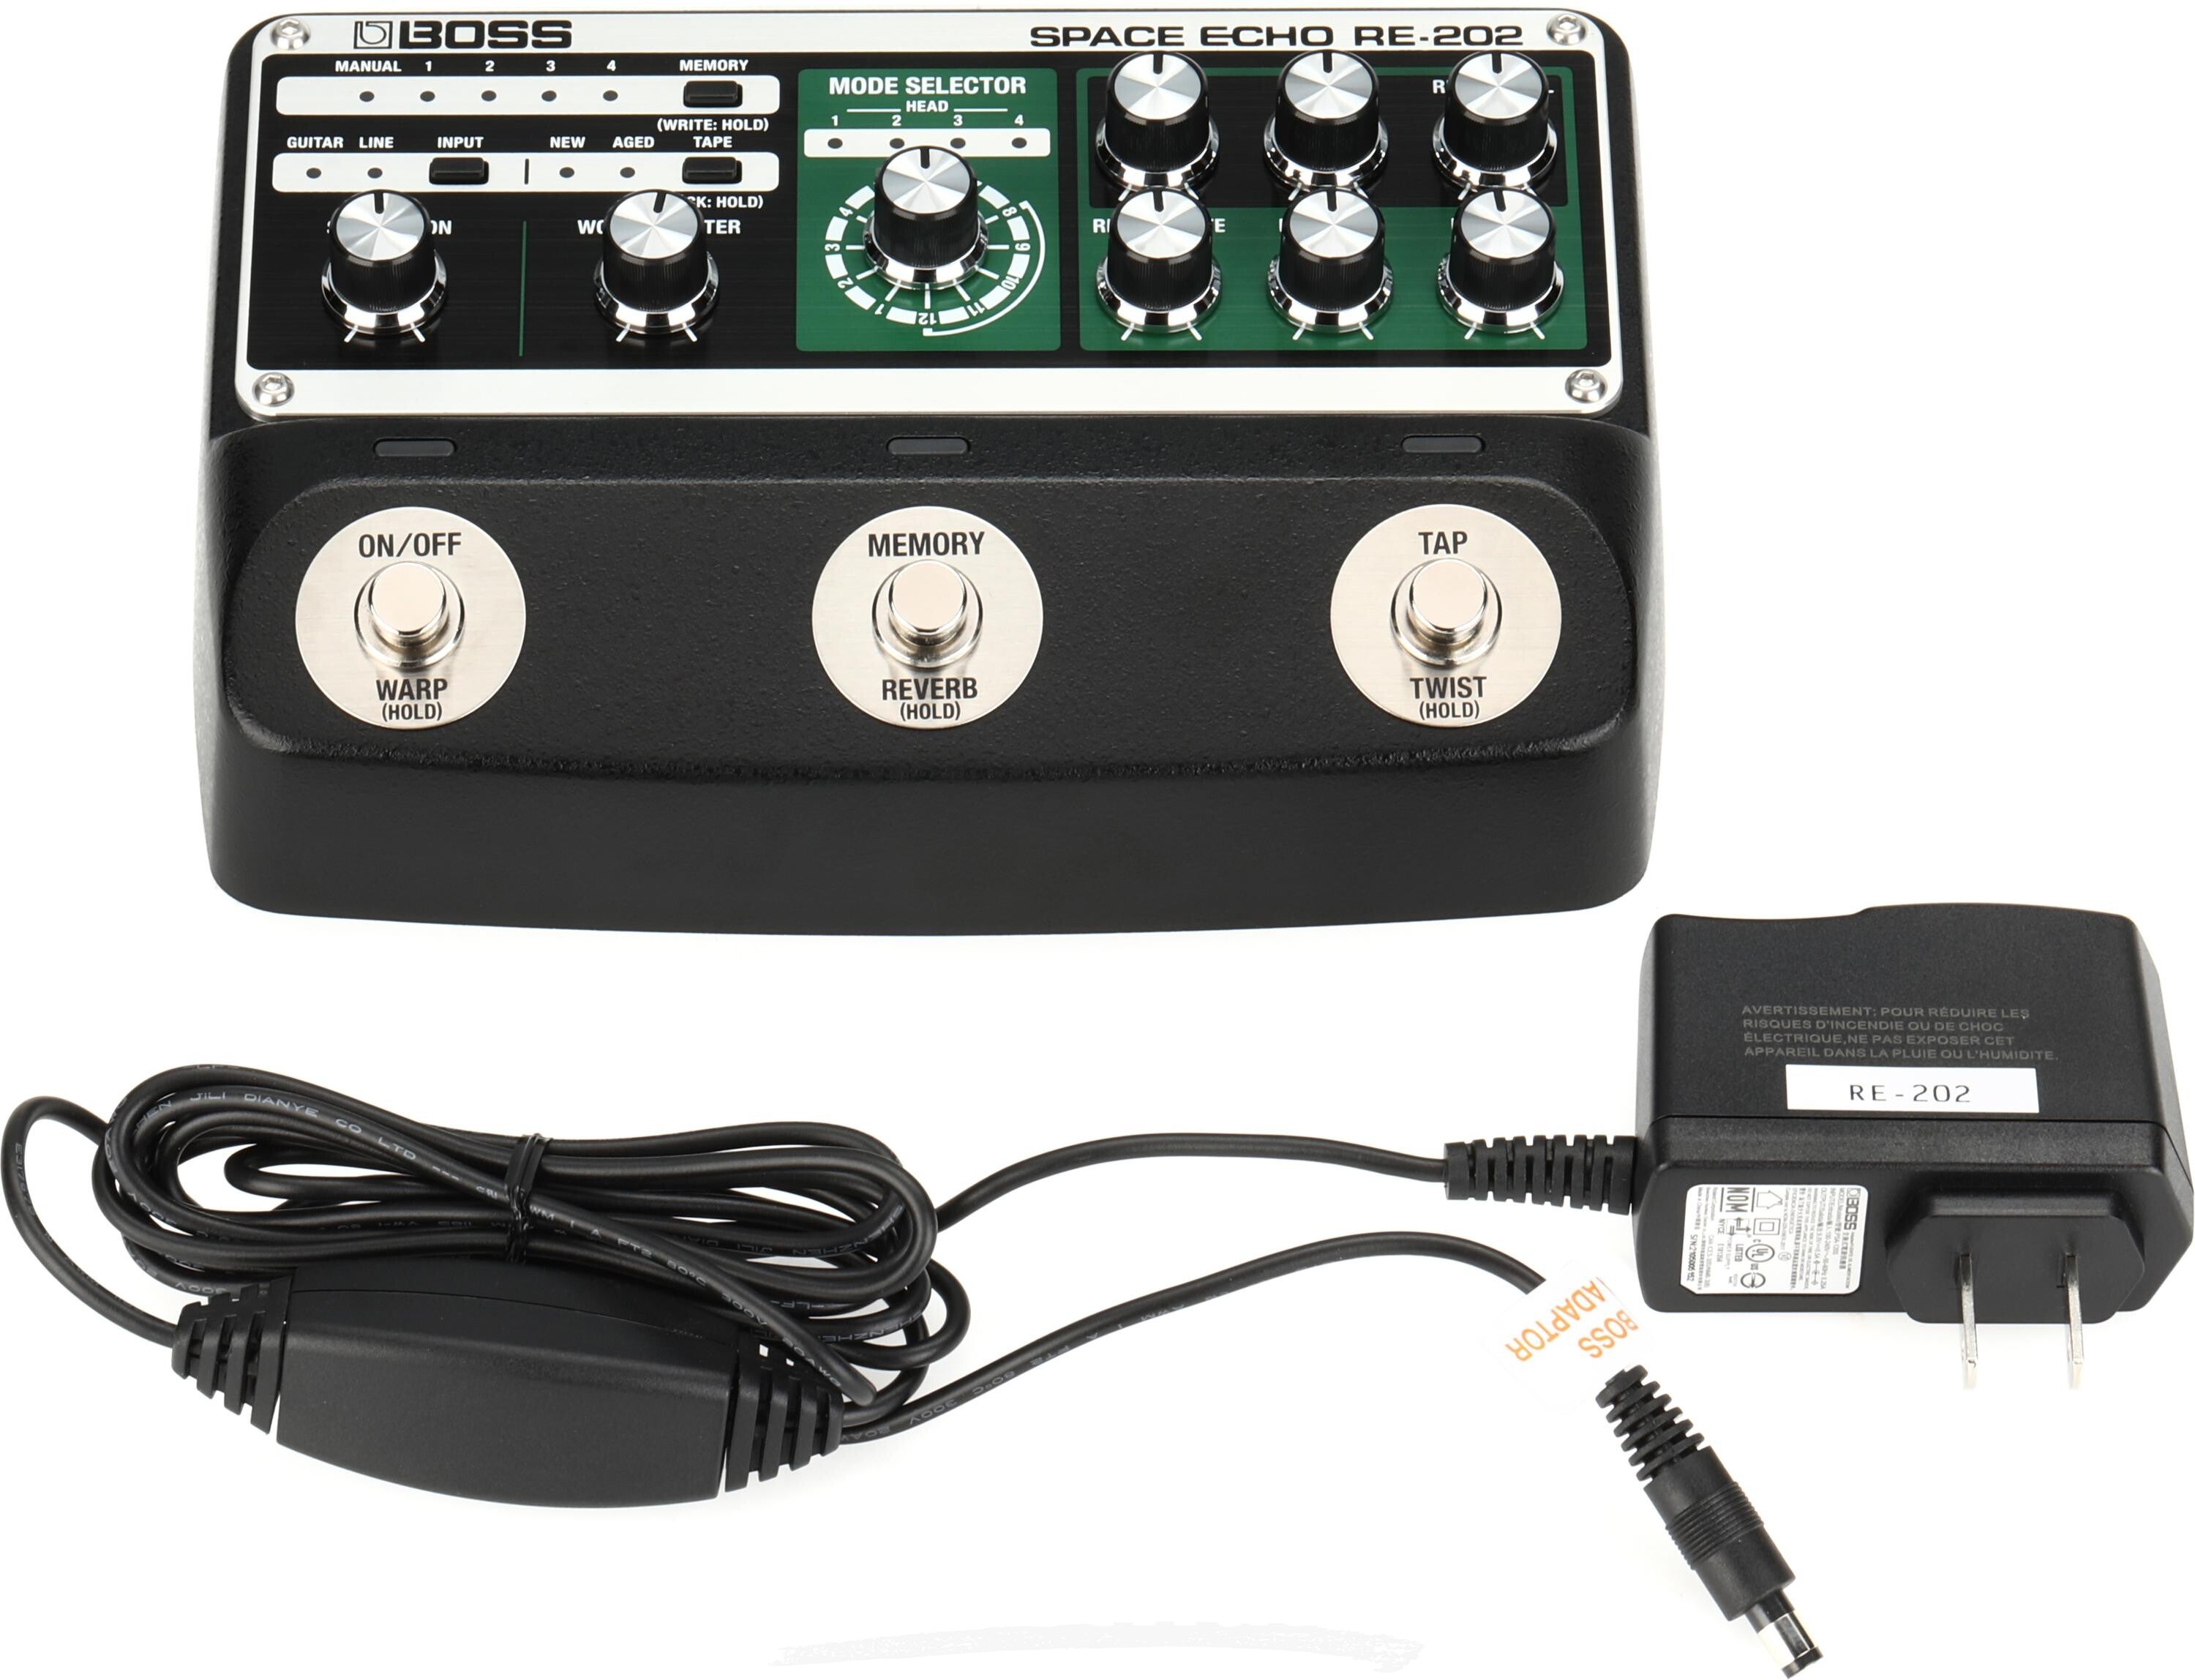 Boss RE-202 Space Echo Digital Delay Pedal Reviews | Sweetwater